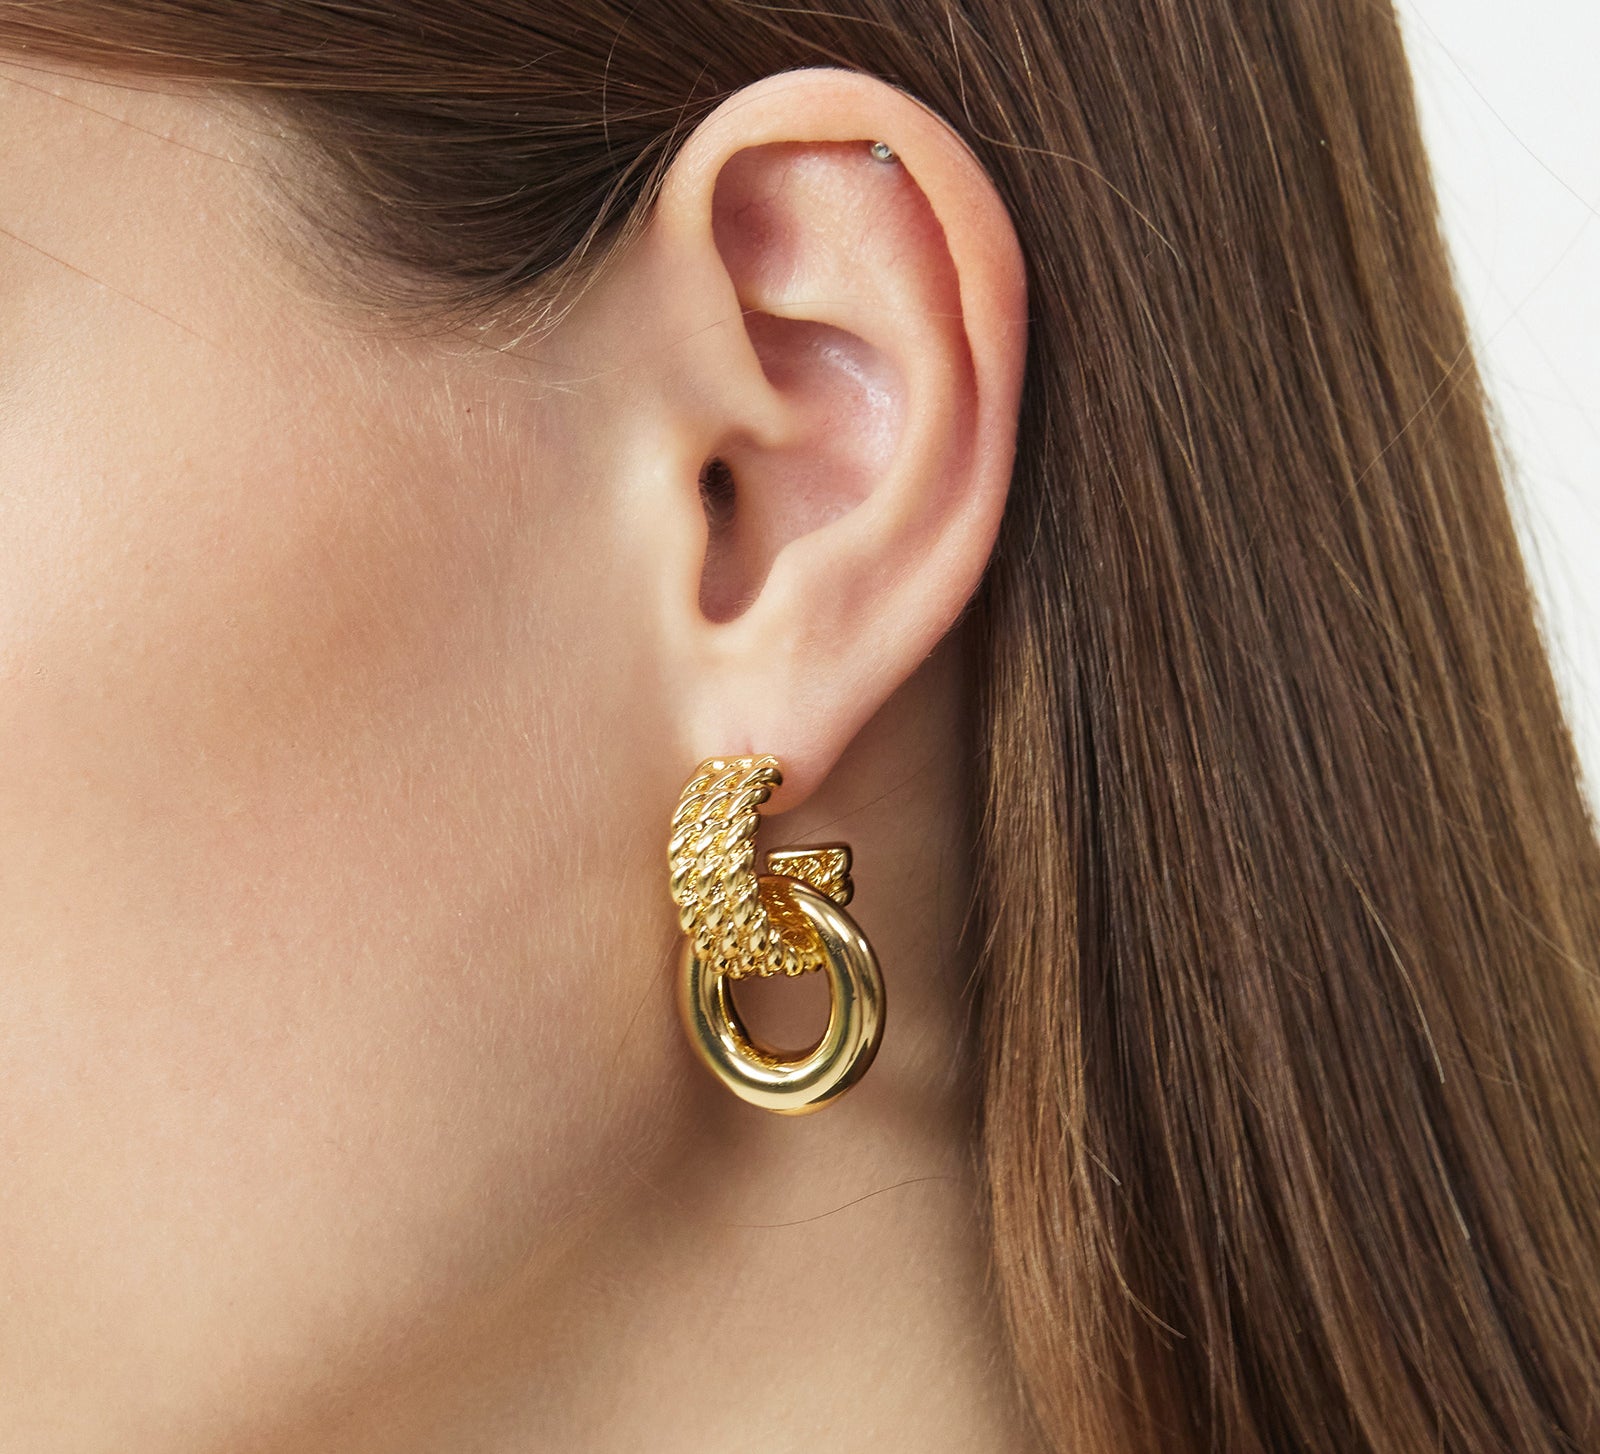 Ring Entwine Chunky Earrings with sculpted gold details, these earrings provide a unique and artistic charm, capturing attention with their intricate design